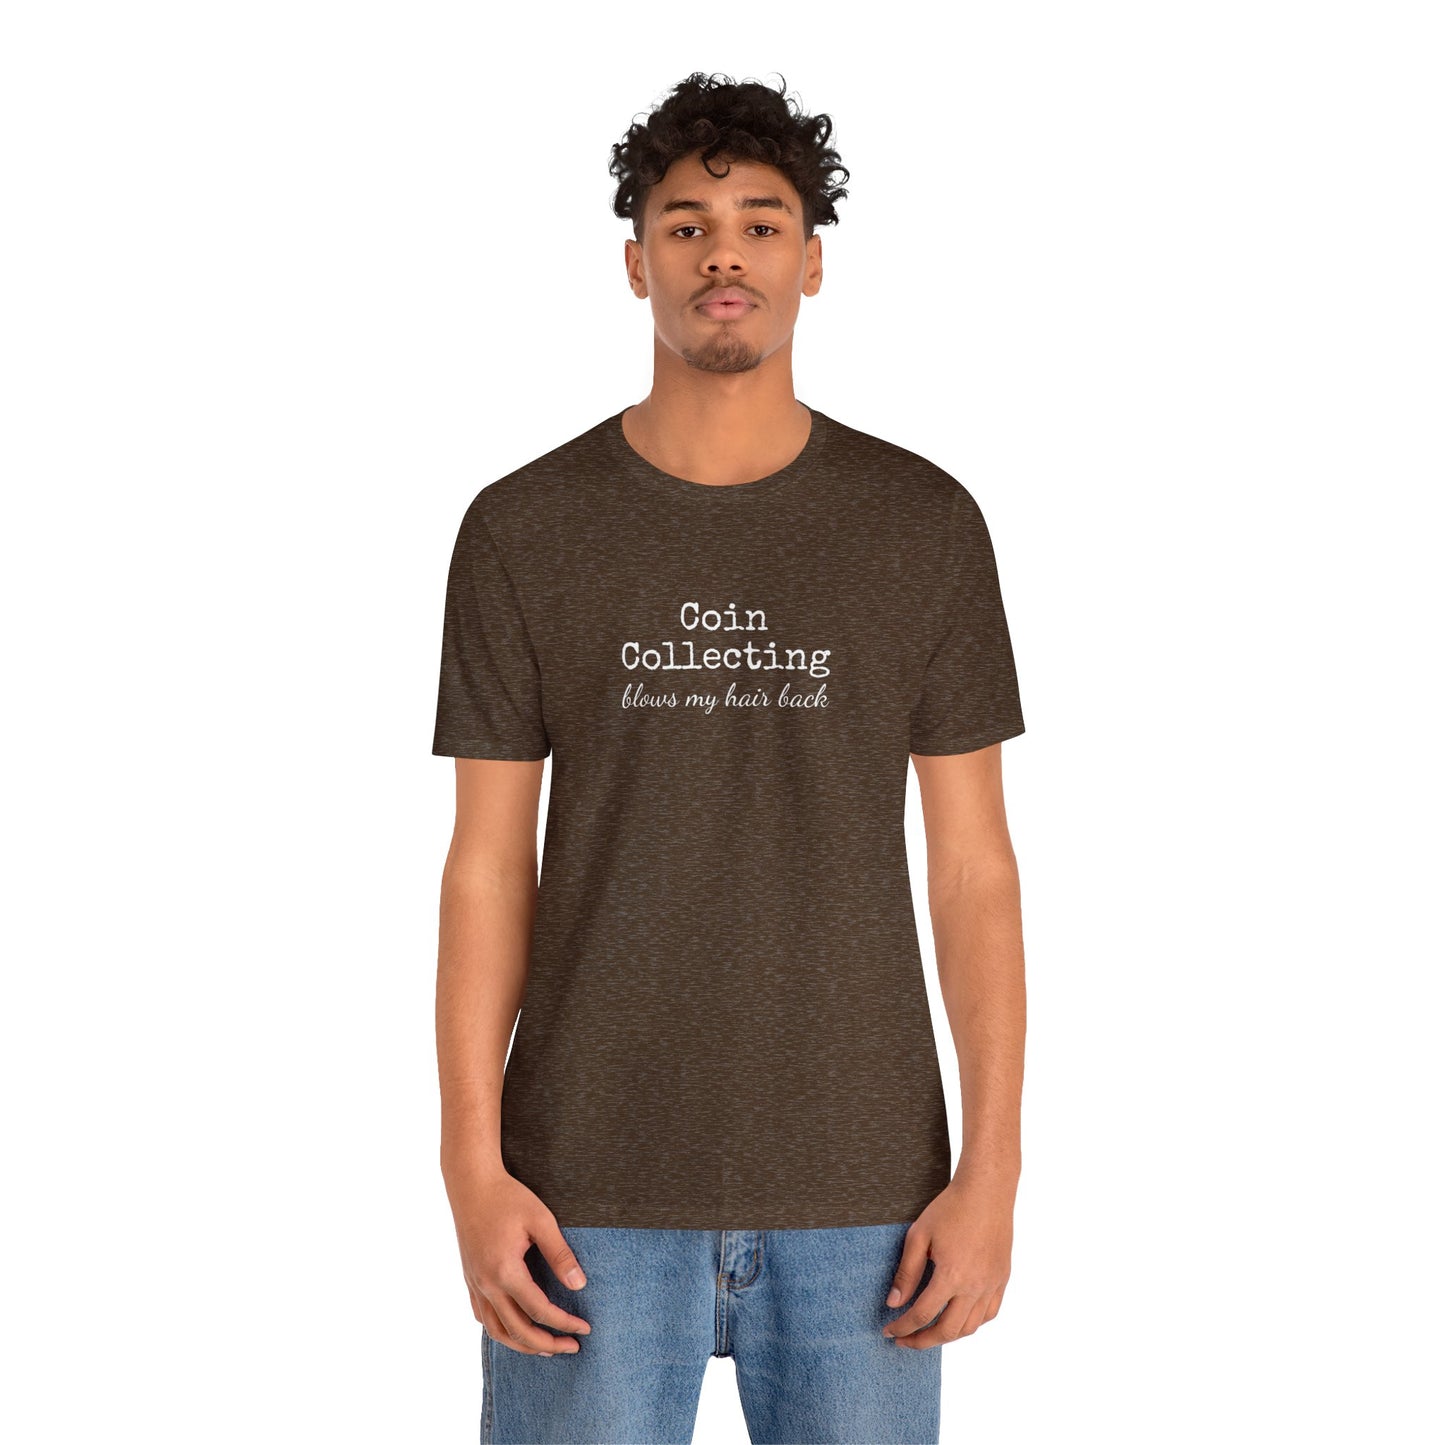 Coin Collecting Blows My Hair Back Unisex Tshirt